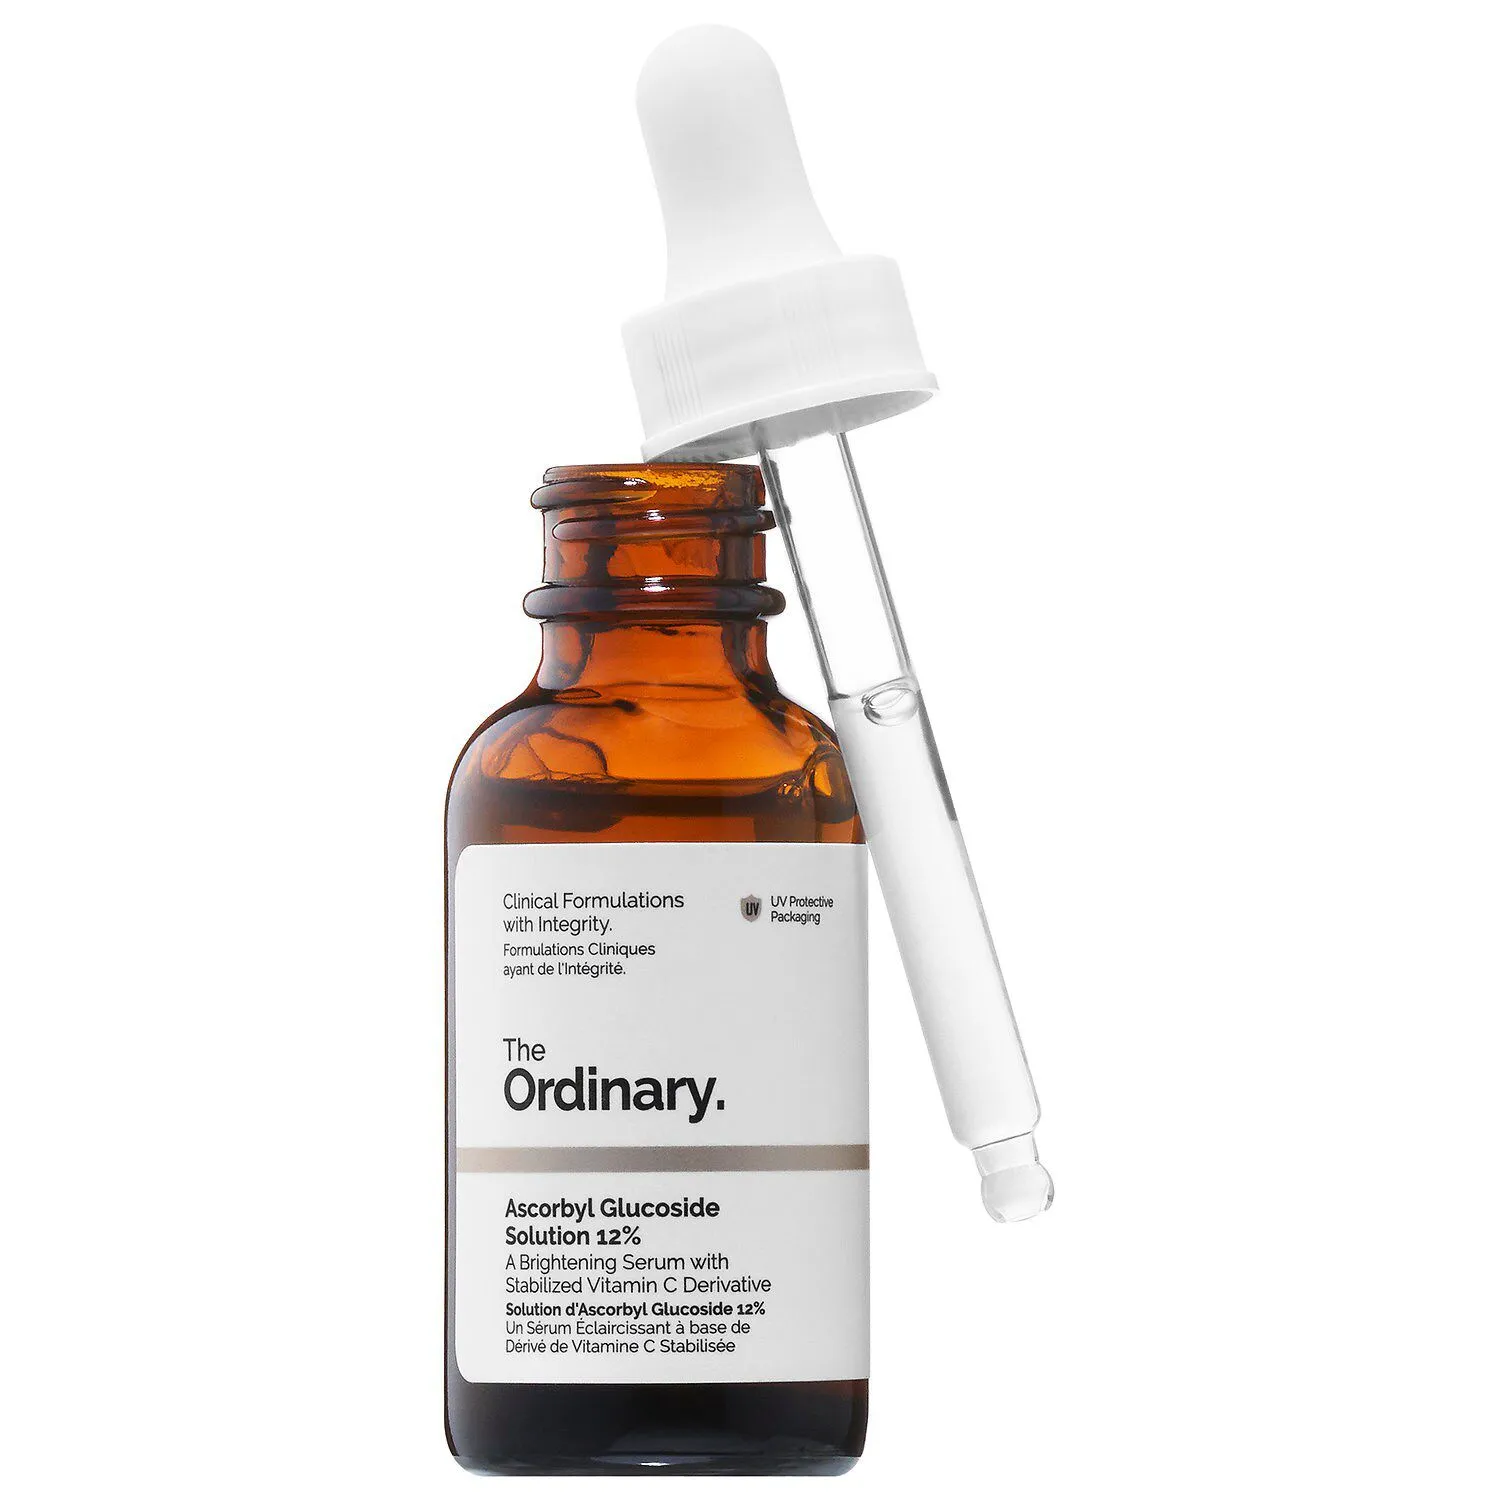 Ascorbyl Glucoside Solution 12% (Vitamin C) by The Ordinary, a brightening serum with stabilized vitamin C derivative.